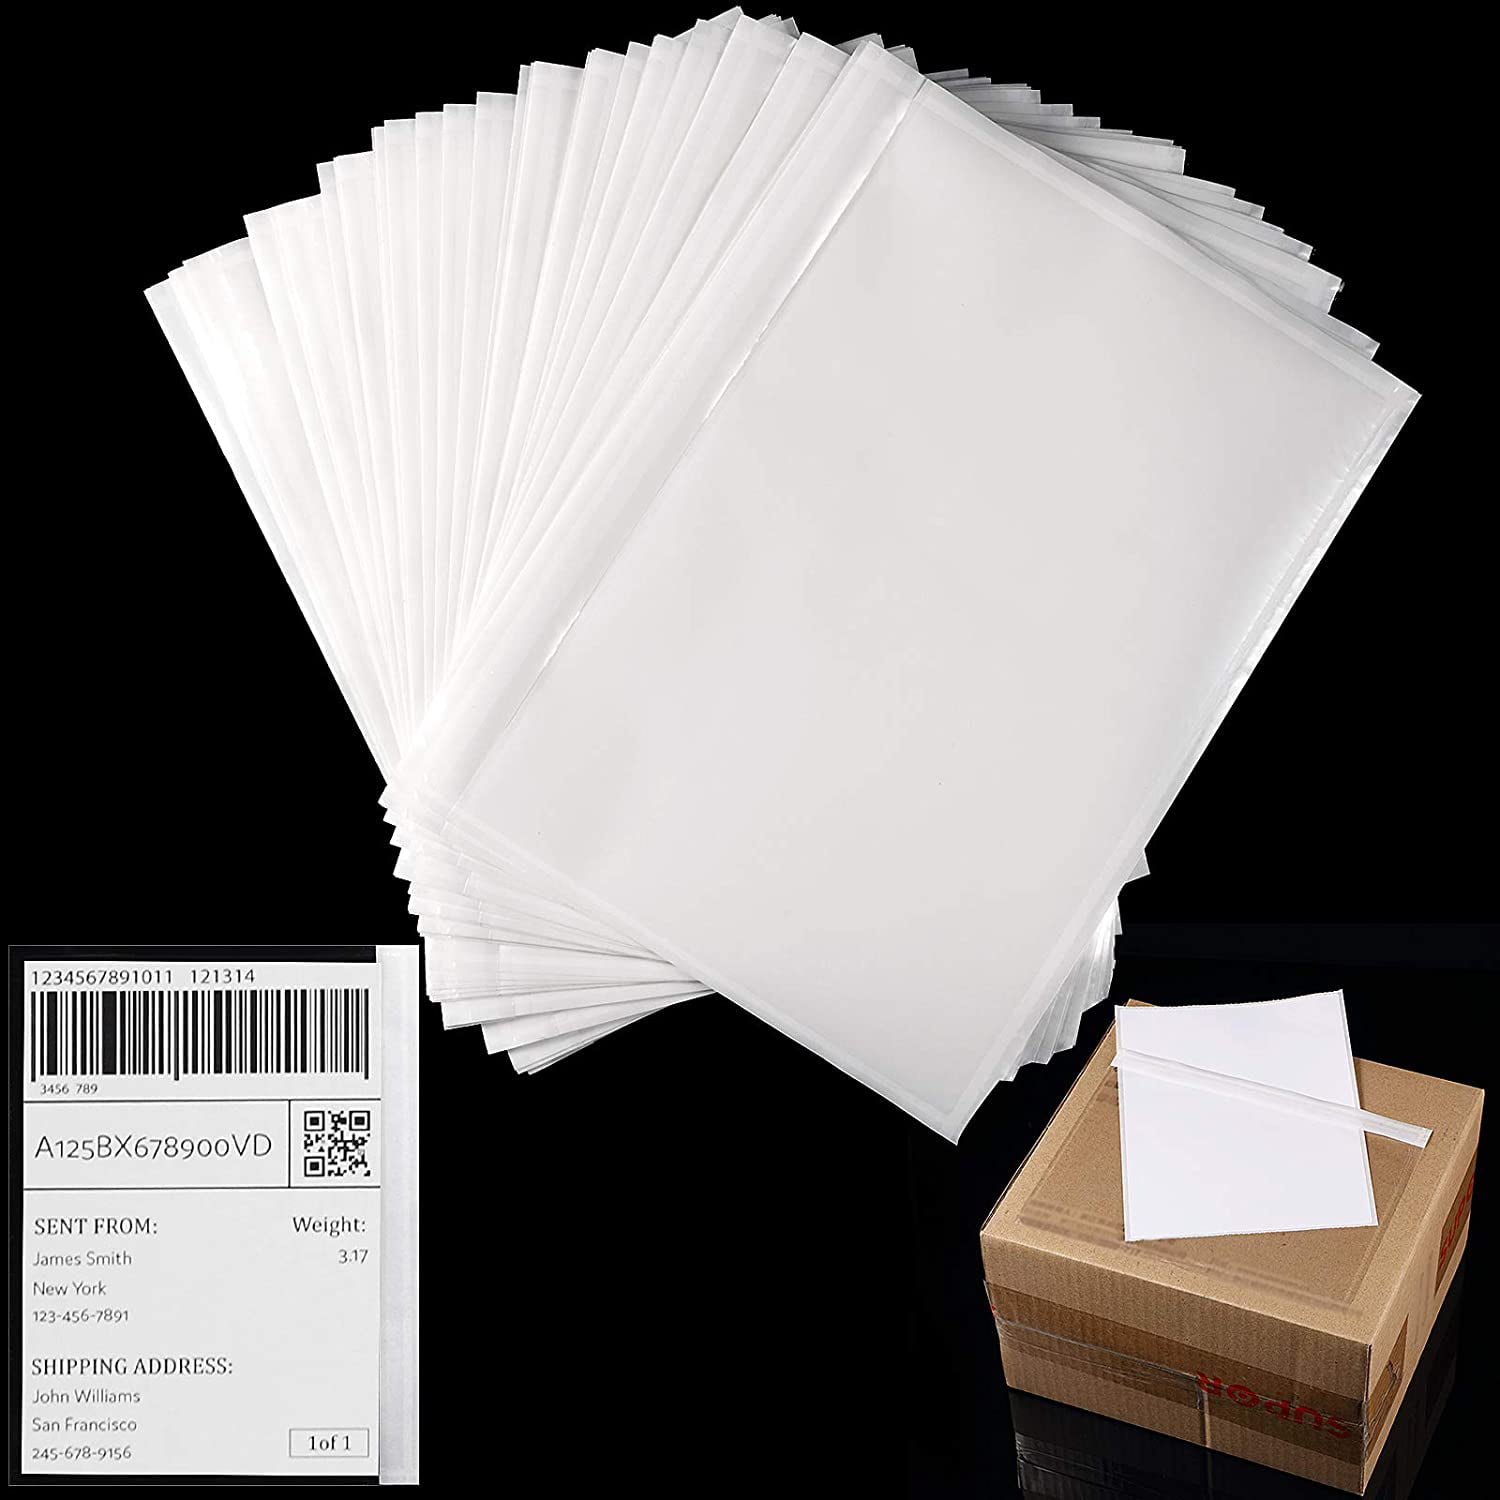 100 Sheets 7.5 x 5.5 Inch Clear Adhesive Top Loading Packing List Mail Shipping Label Envelopes and Sticker Labels Adhesive Shipping Address Labels for Laser Ink Jet Printer 